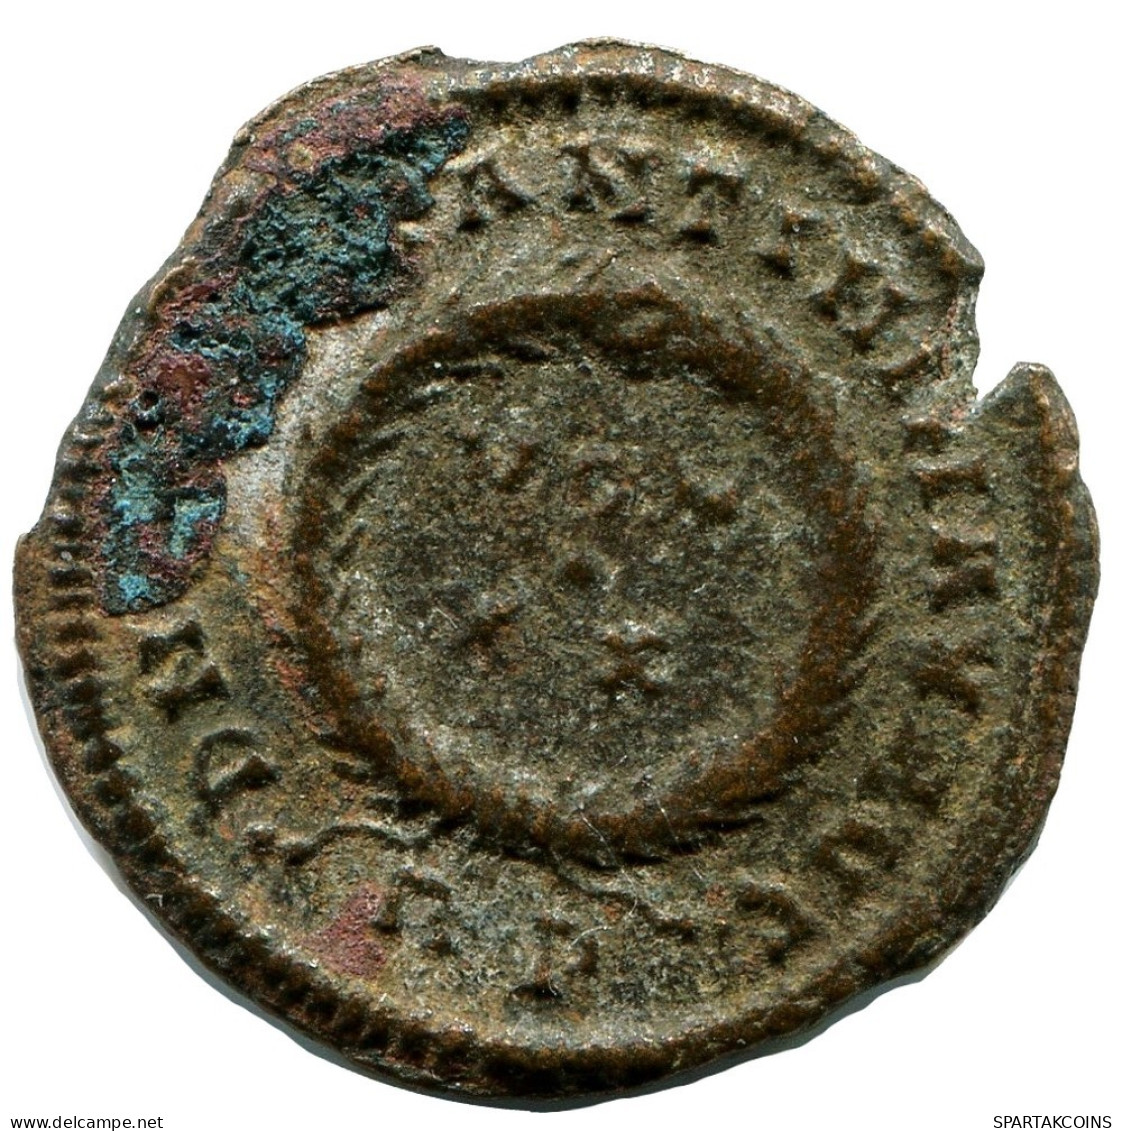 CONSTANTINE I MINTED IN ROME ITALY FOUND IN IHNASYAH HOARD EGYPT #ANC11175.14.D.A - L'Empire Chrétien (307 à 363)